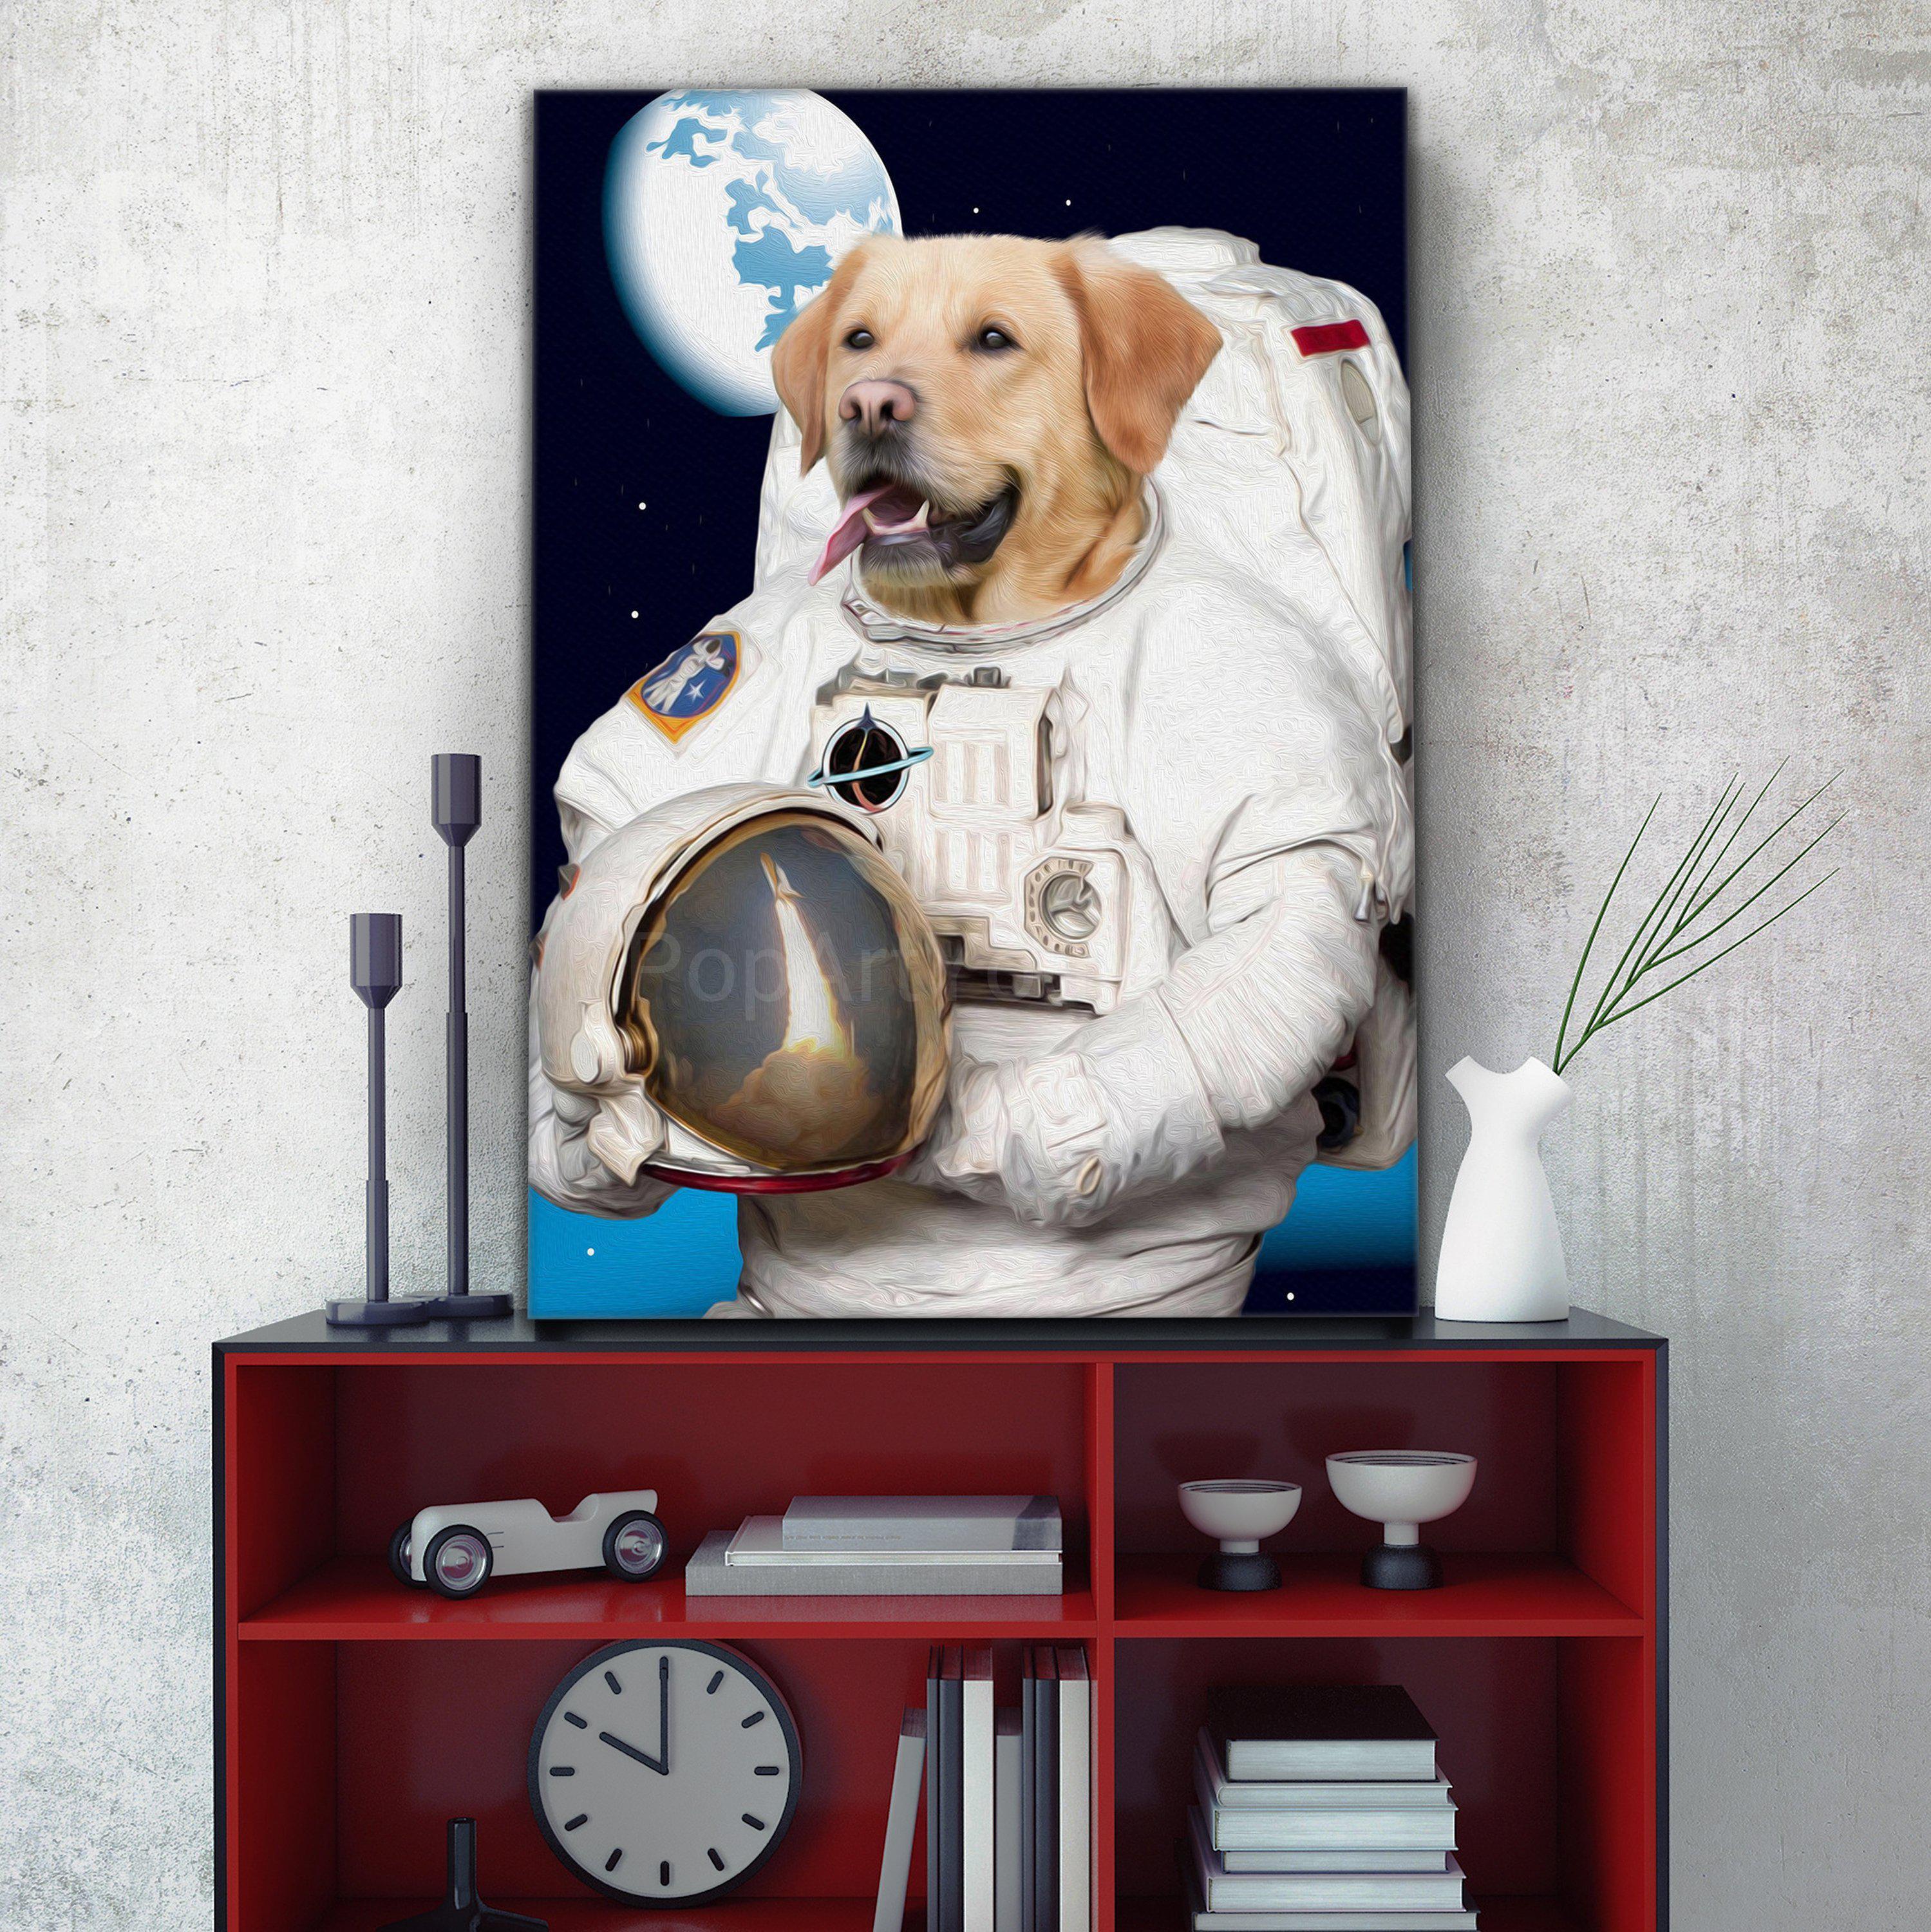 Portrait of a dog with a human body dressed in white Astronaut clothes stands on a red table near a white vase